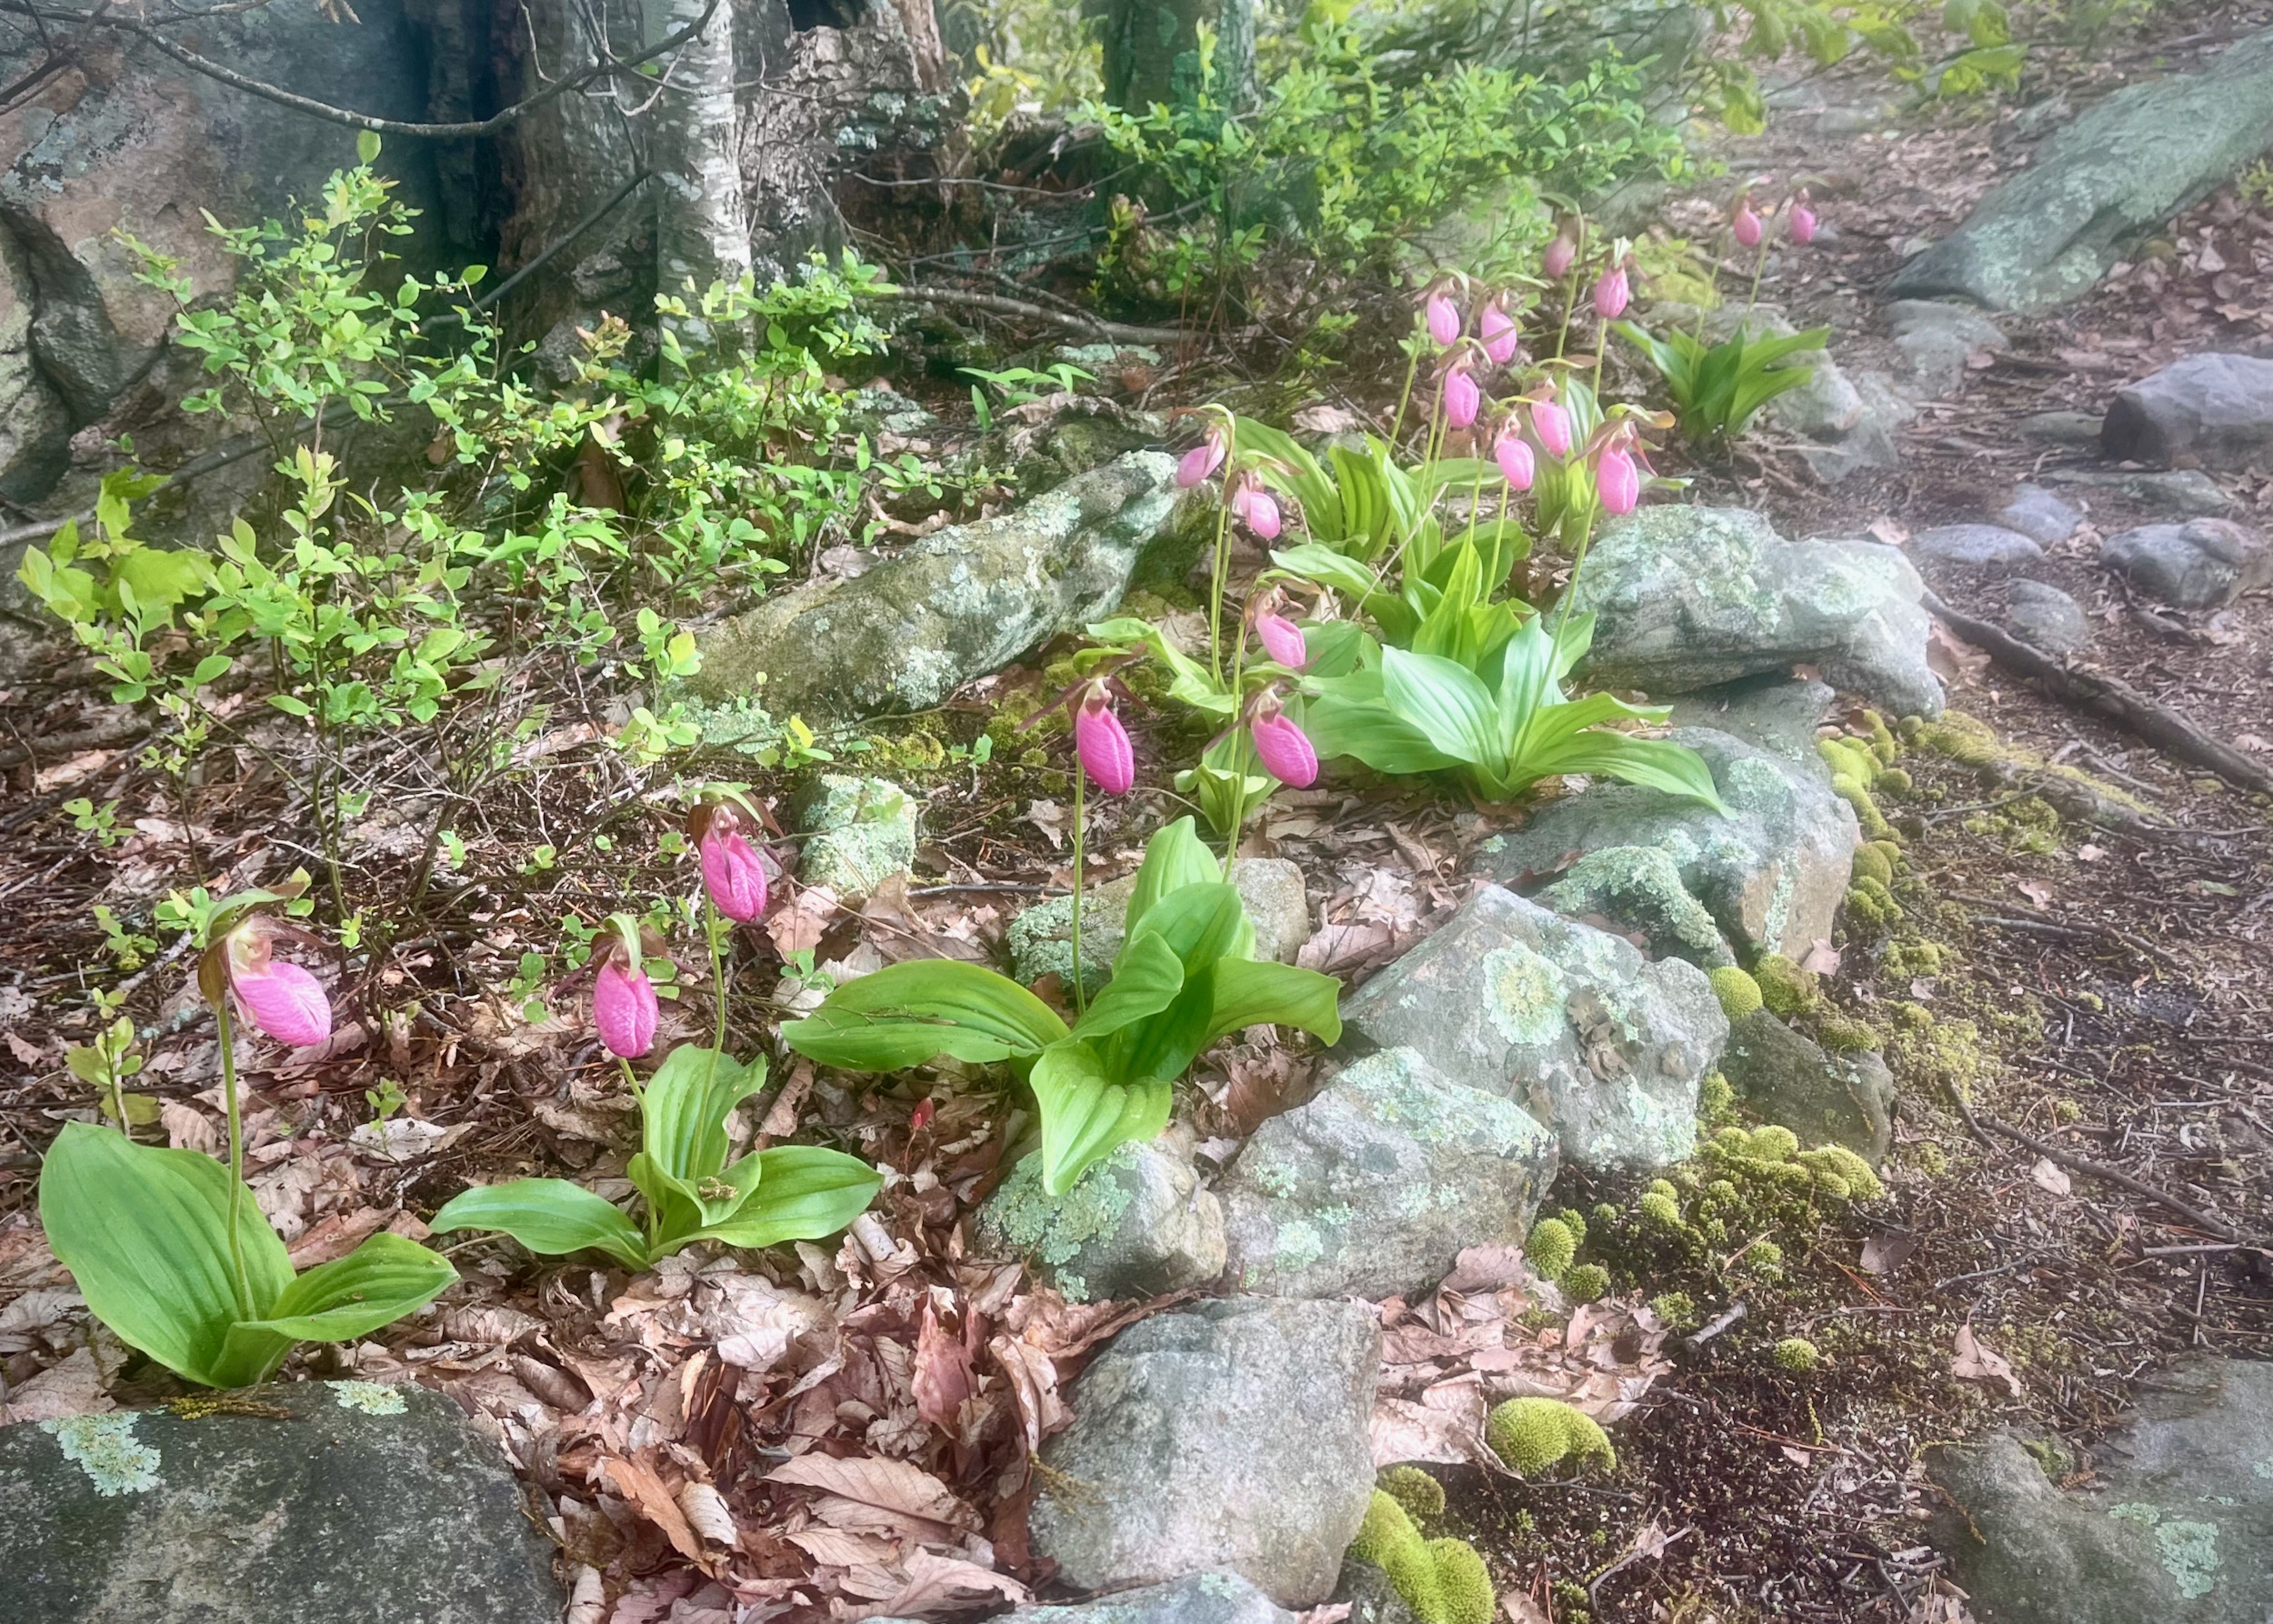 Pink lady slippers along the trail